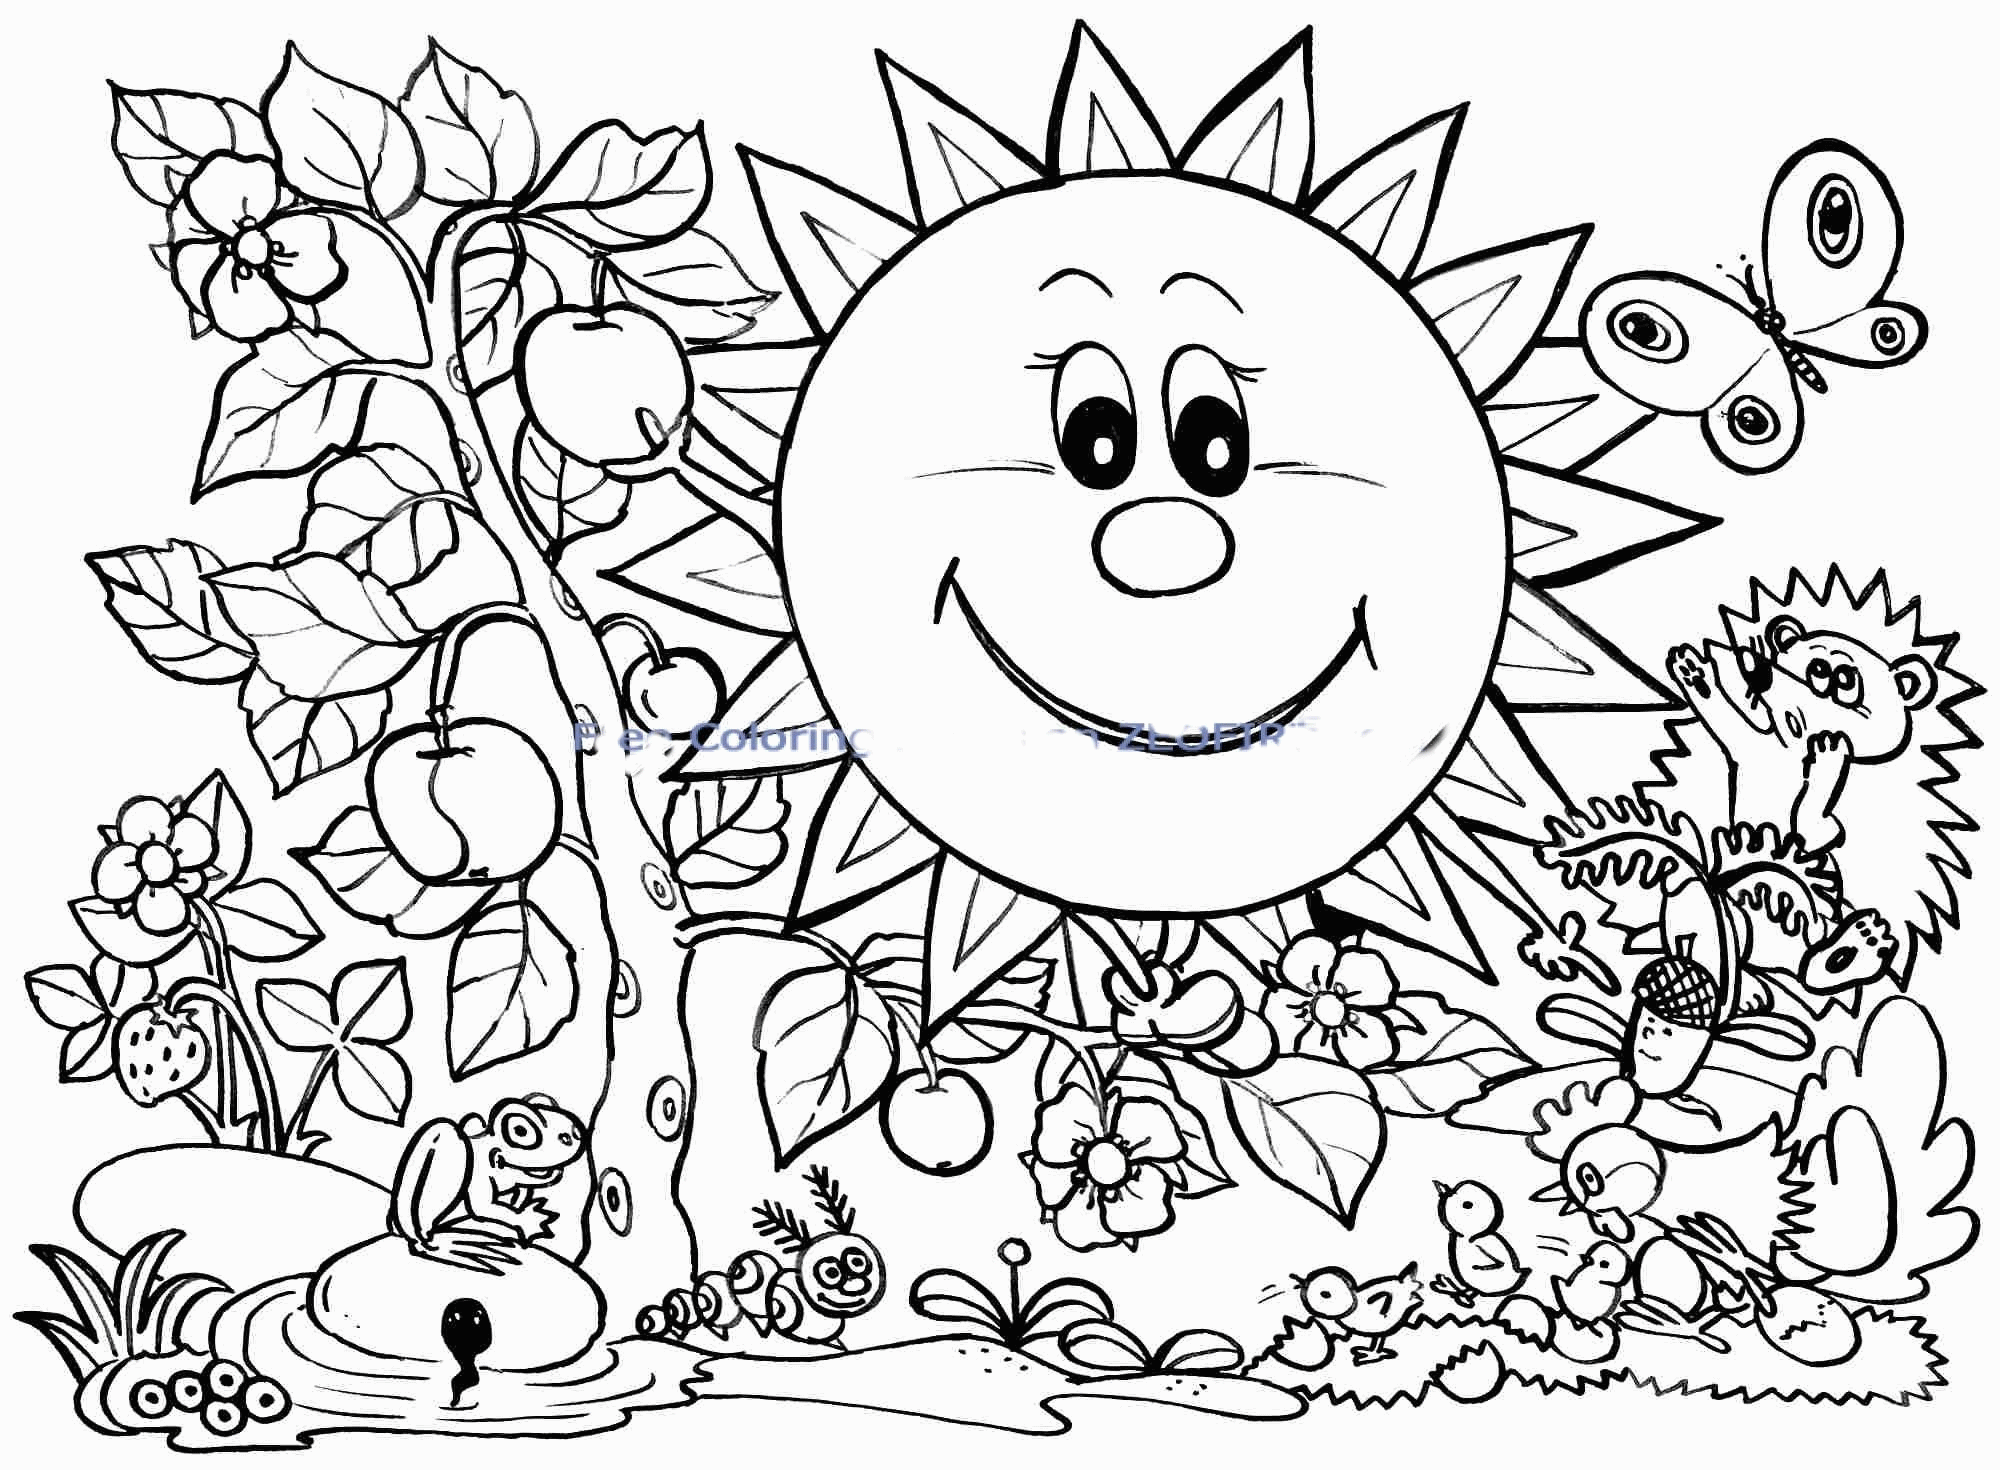 spring-coloring-pages-14 - ColoringPagehub